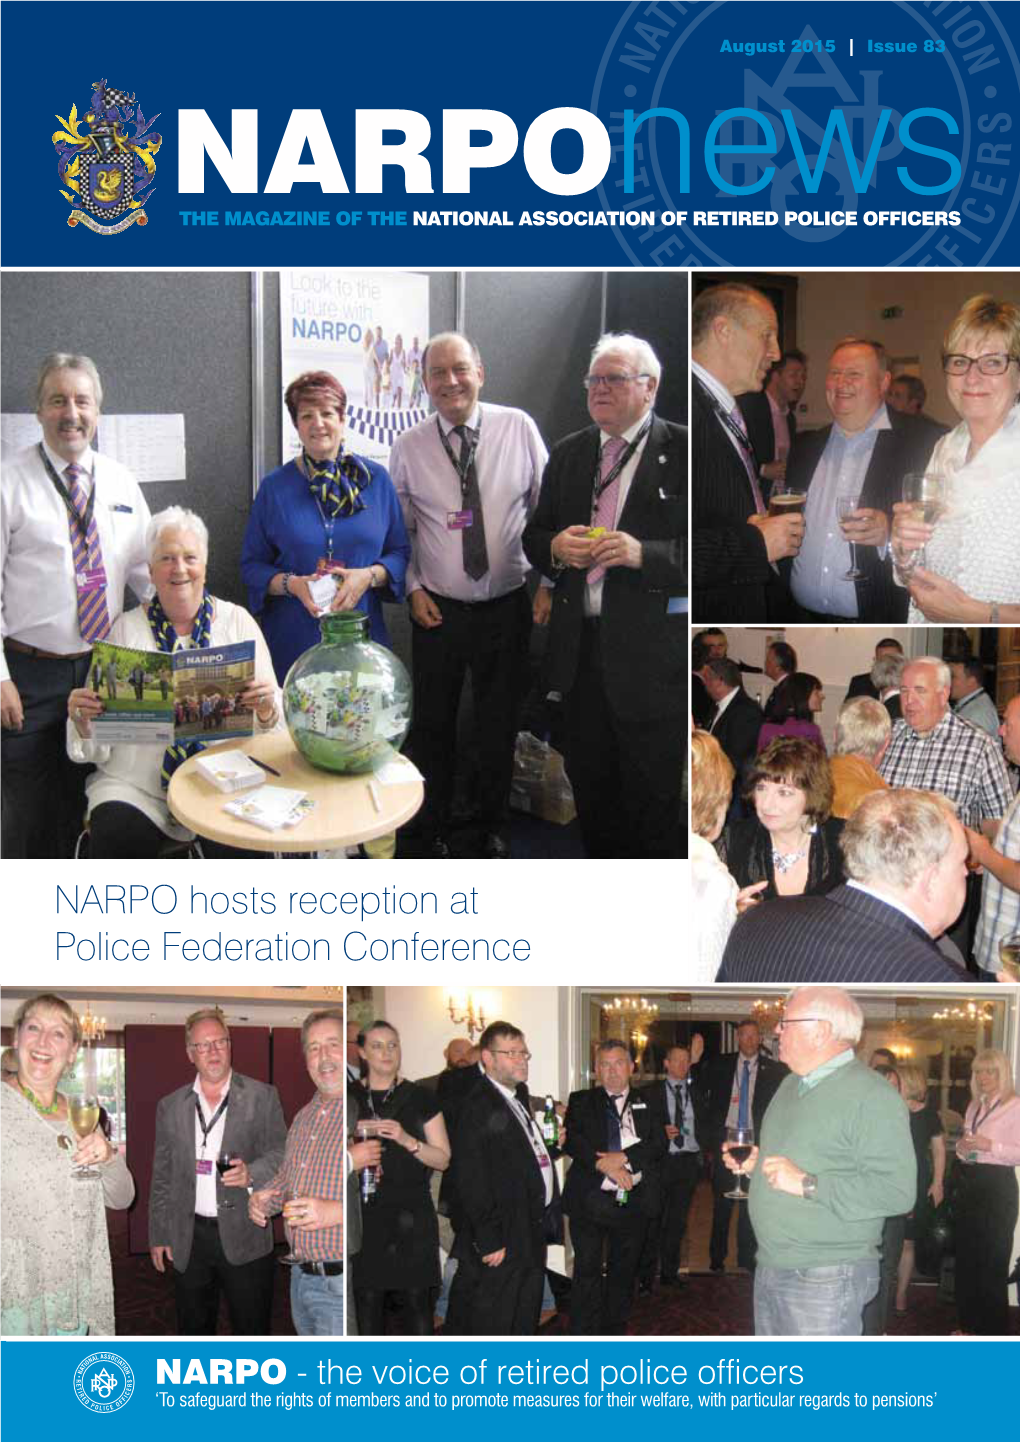 NARPO Hosts Reception at Police Federation Conference